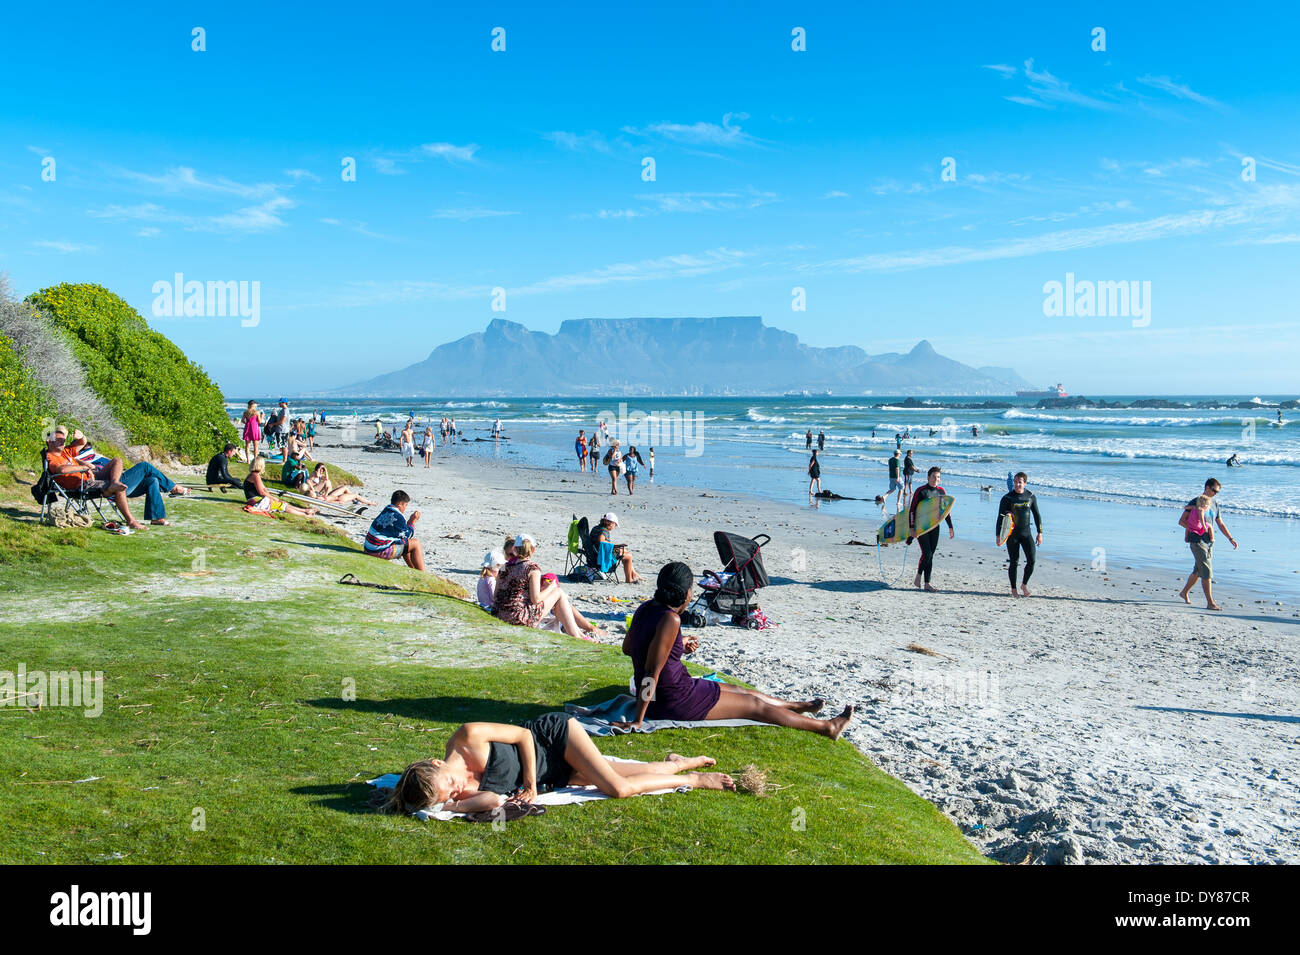 People walking on the beach in Blouberg, Table Mountain in the background, South Africa Stock Photo